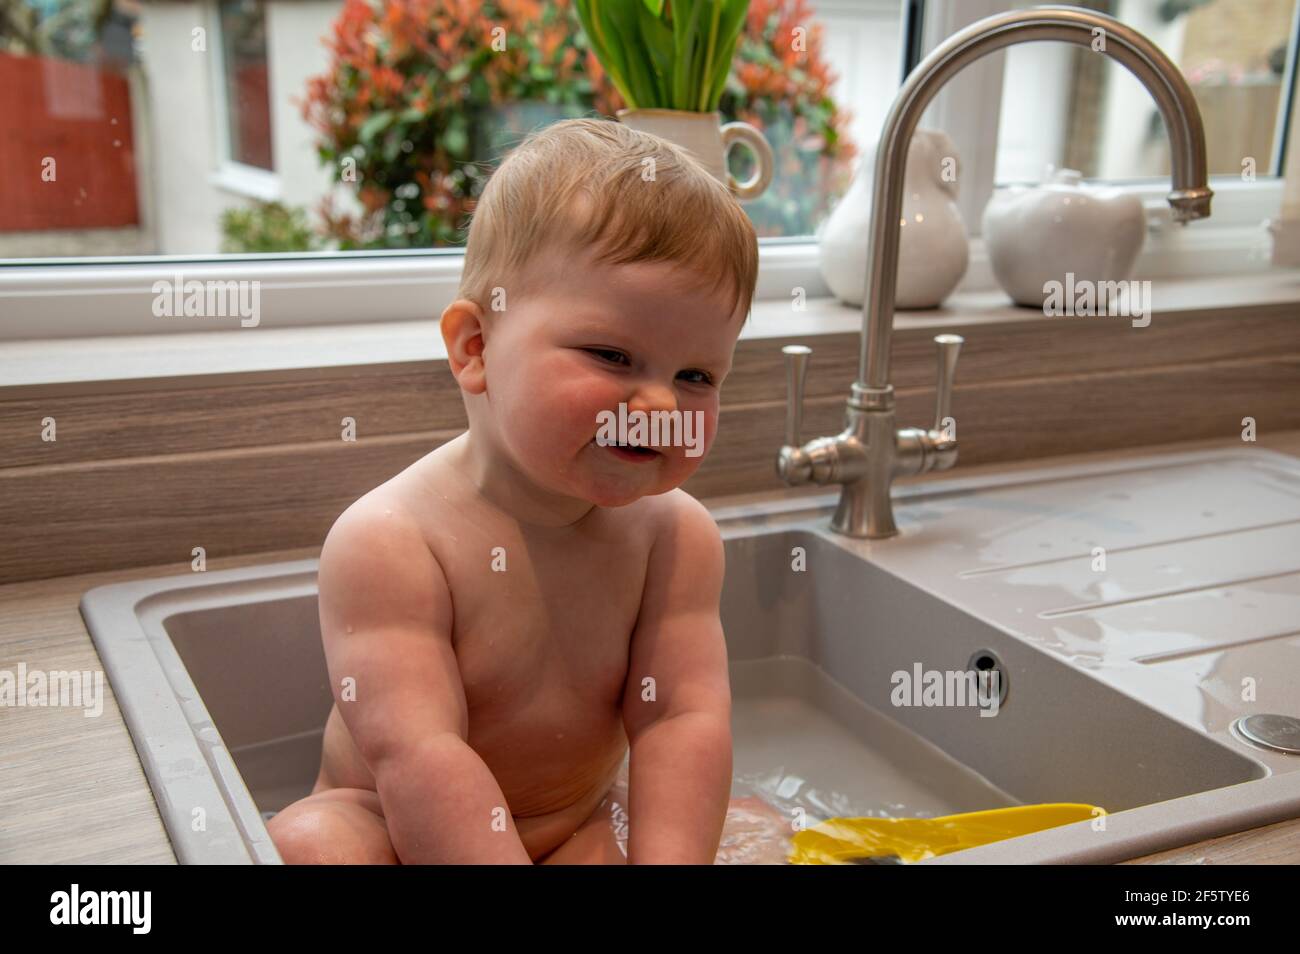 A baby being bathed in a kitchen sink Stock Photo